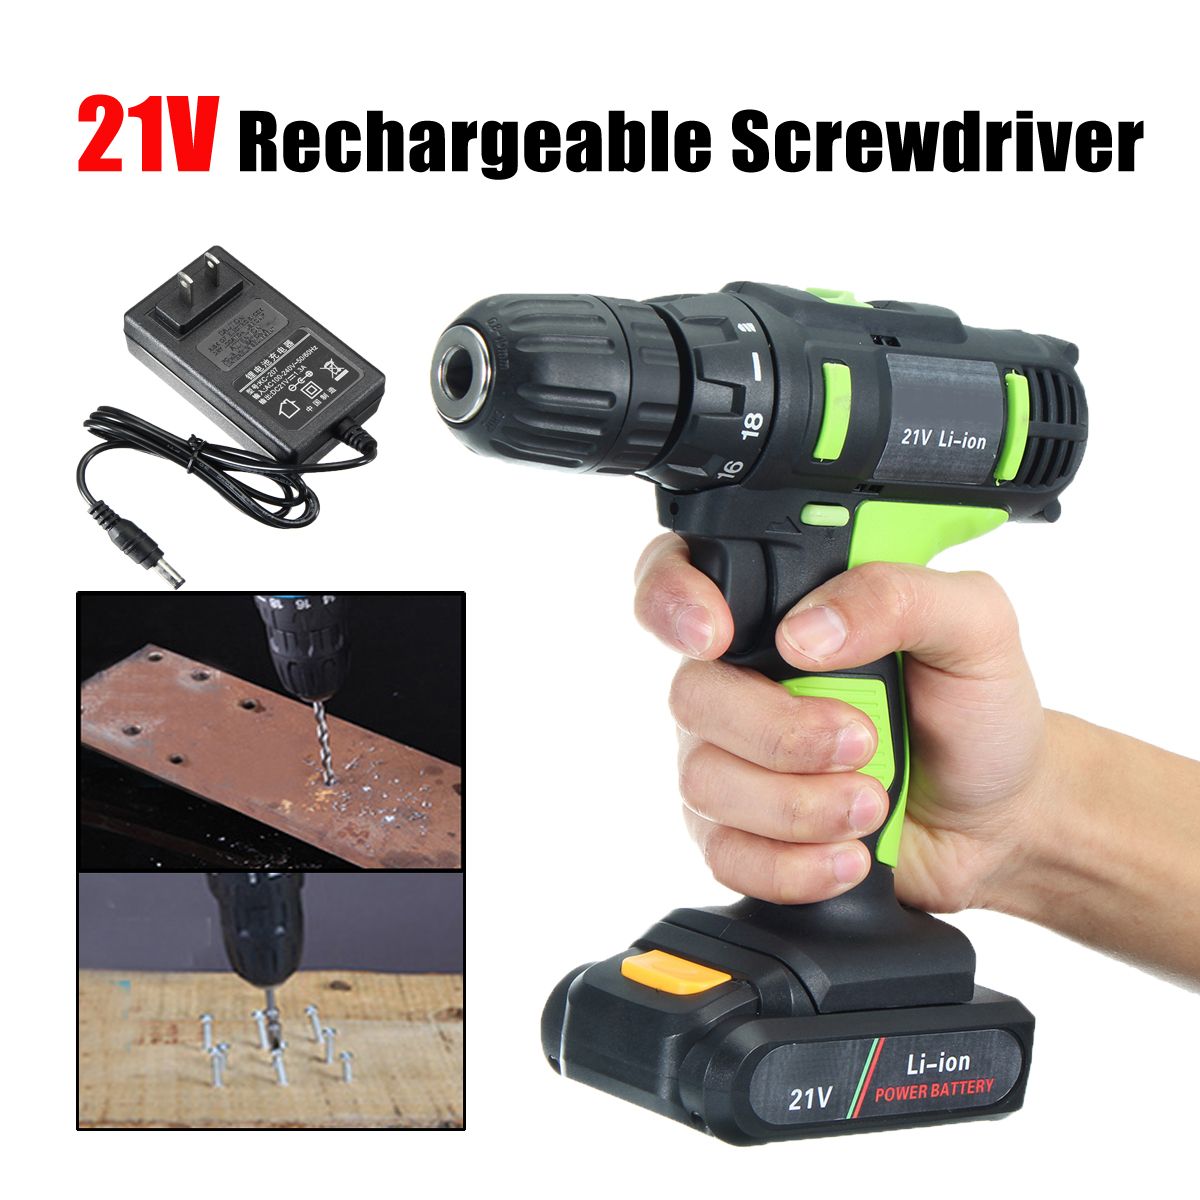 21V-Li-ion-Electric-Screwdriver-Rechargeable-Electric-Charging-Power-Drill-Two-Speed-30-45Nm-1256491